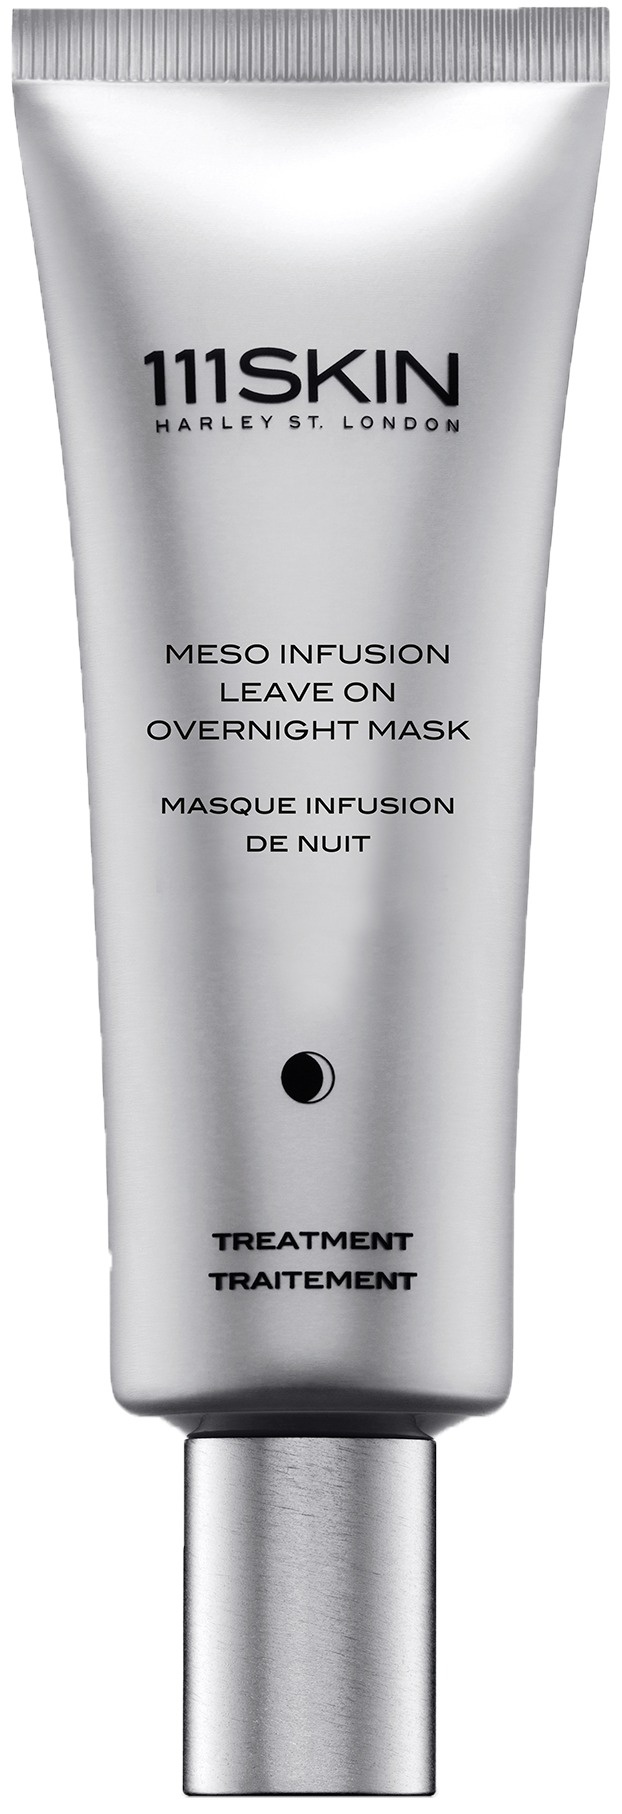 111SKIN Meso Infusion Leave On Overnight Mask